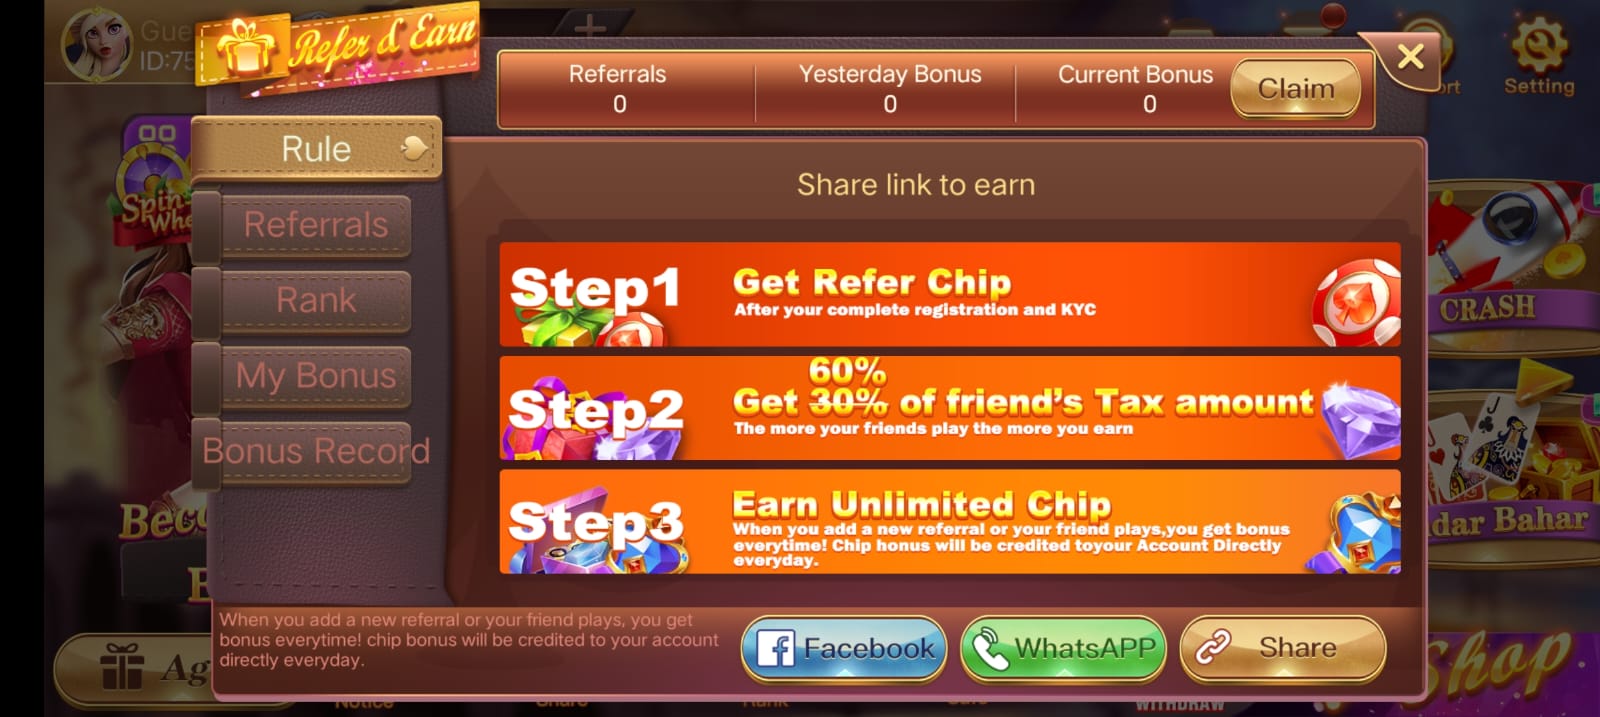 REFER AND EARN IN RUMMY ARES APP